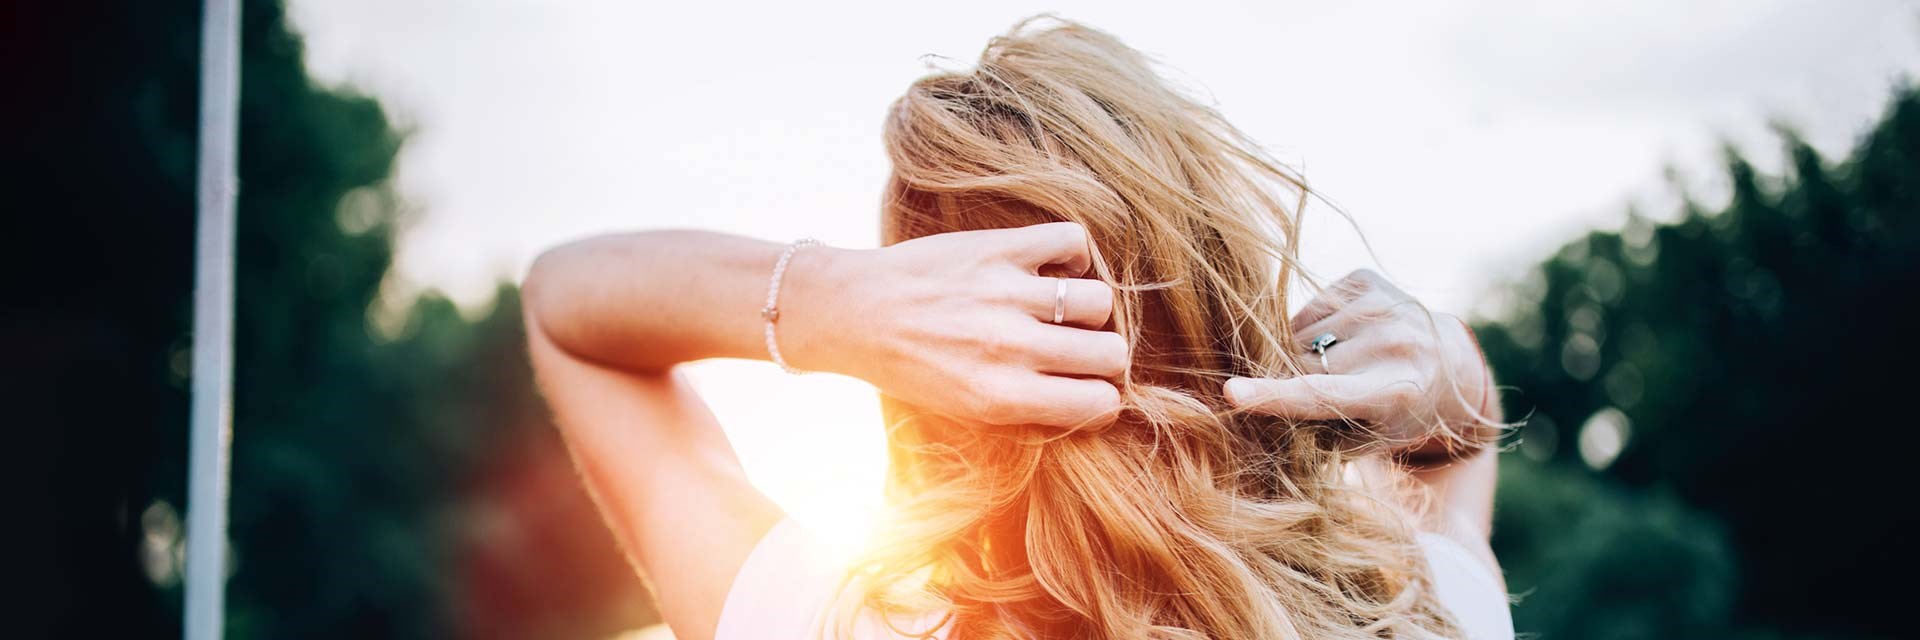 Woman with fingers in hair in evening sunshine